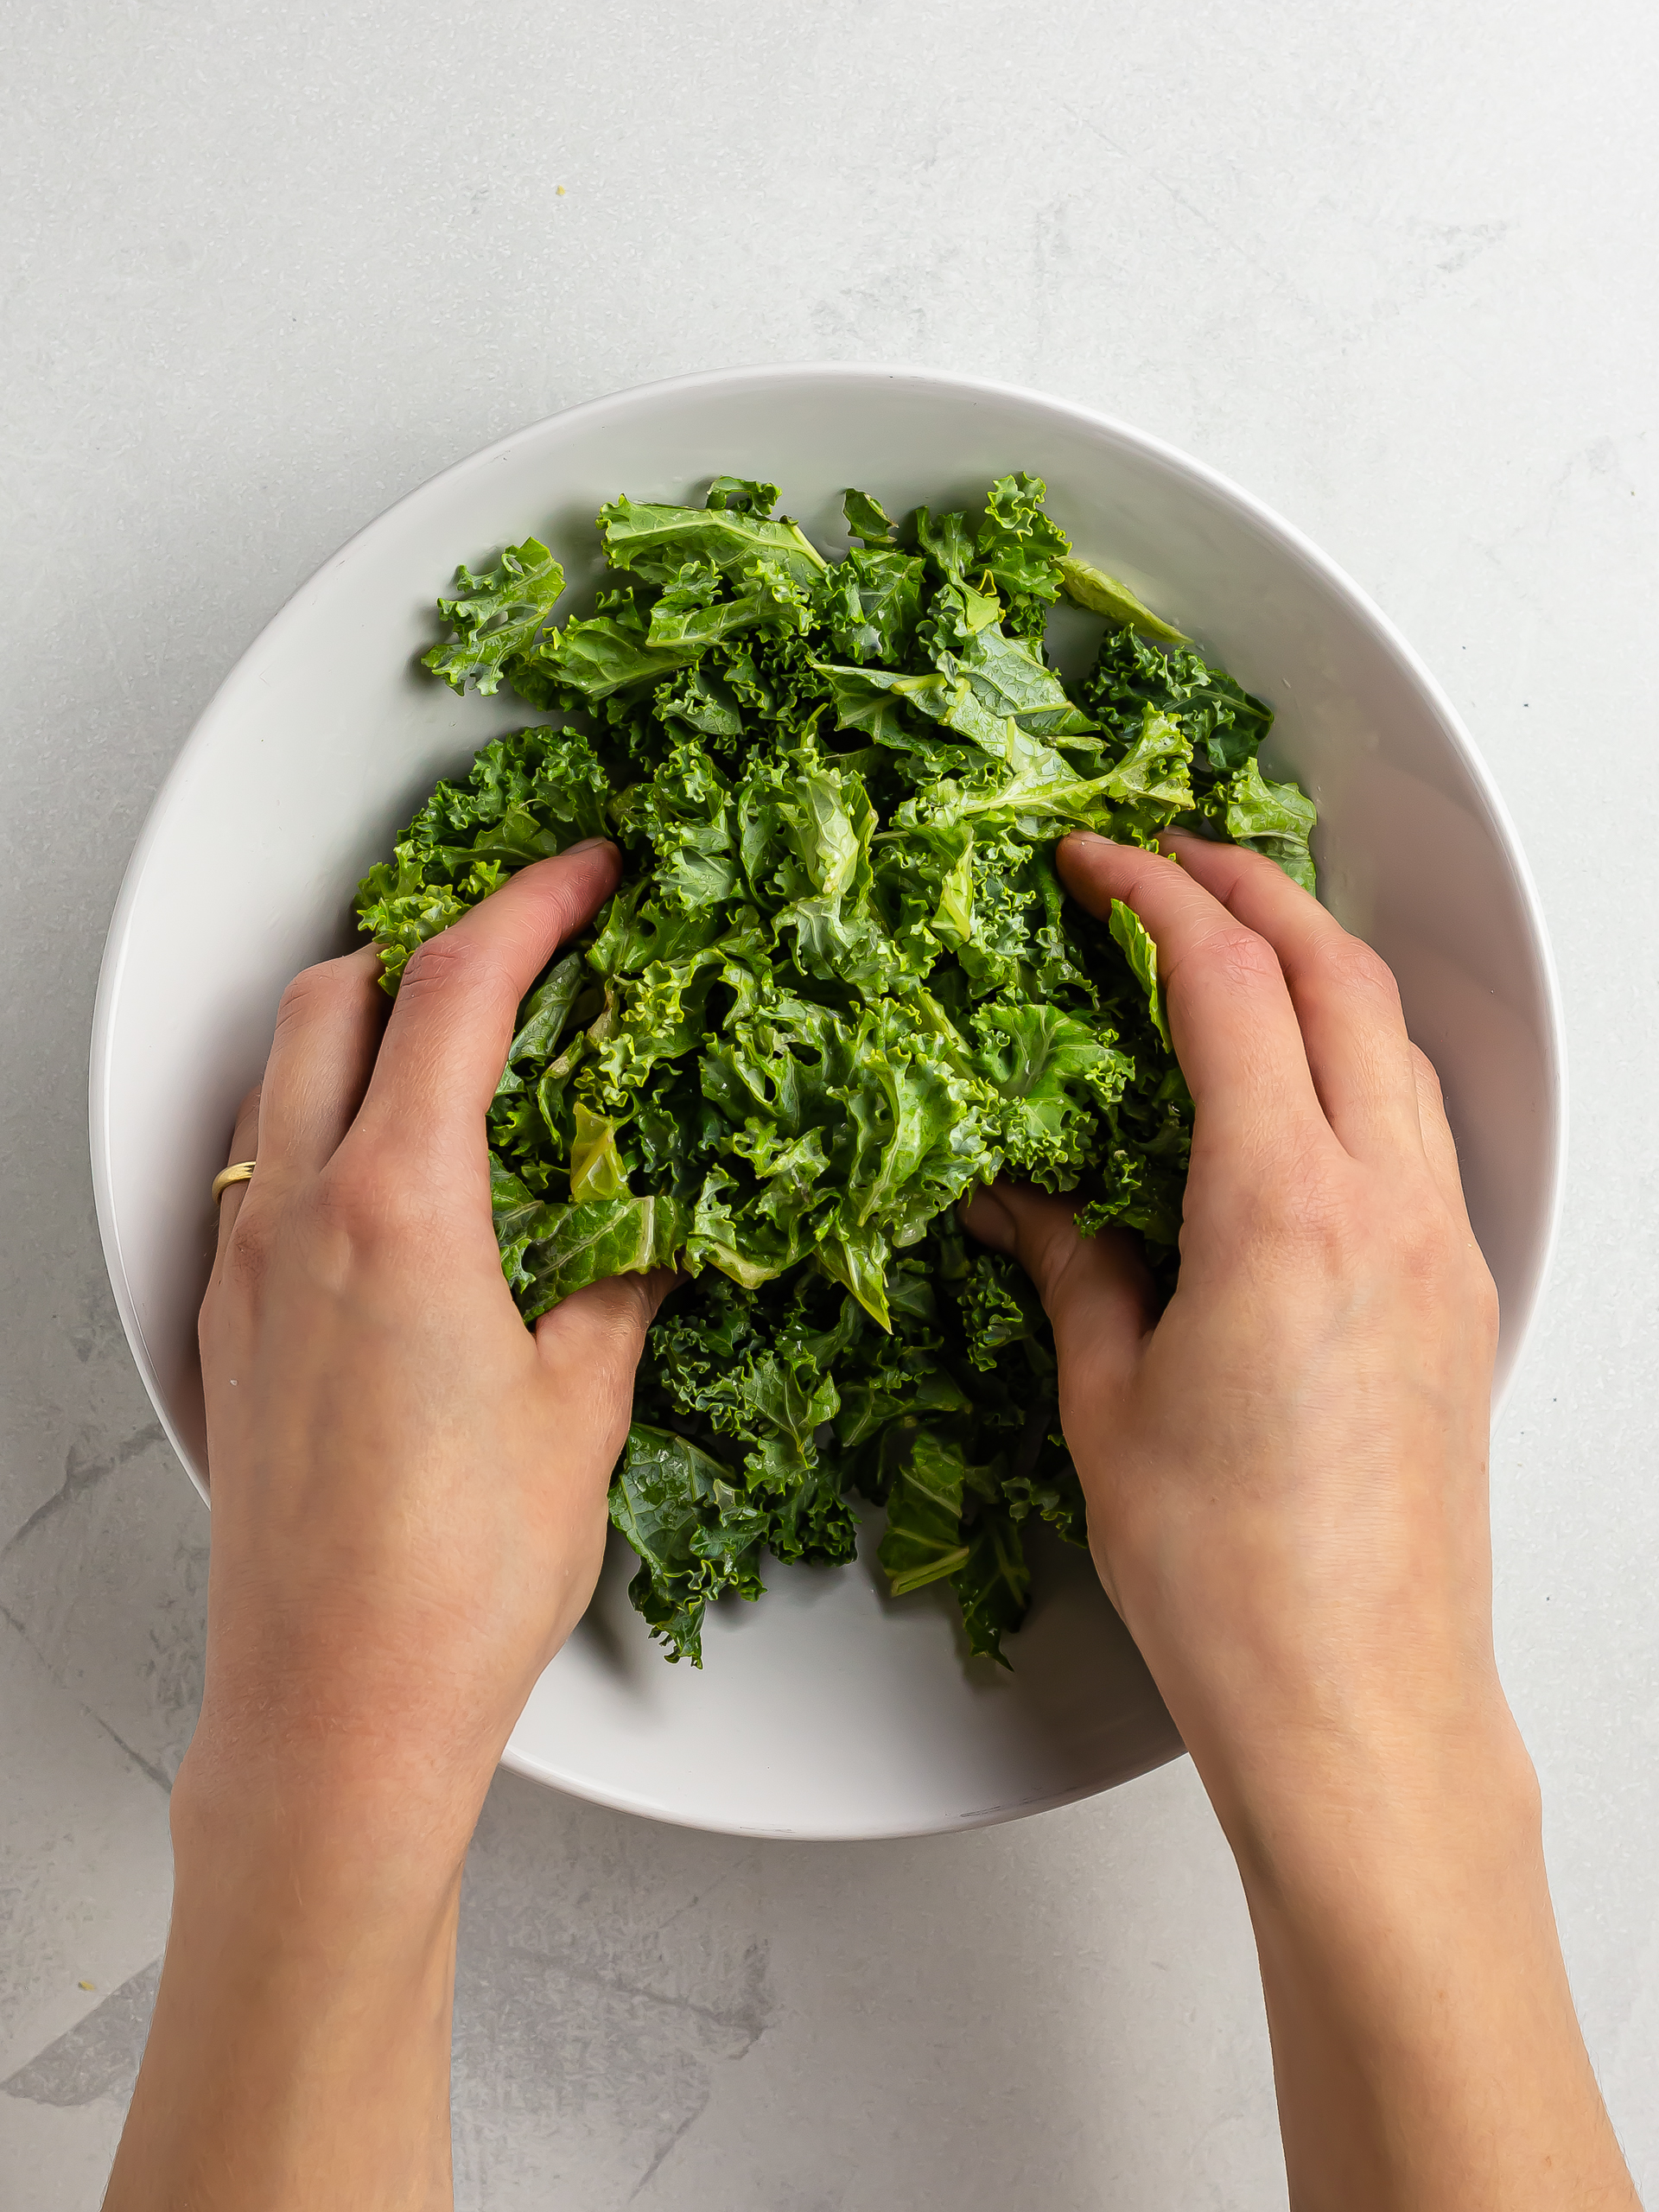 how to soften the kale by hand